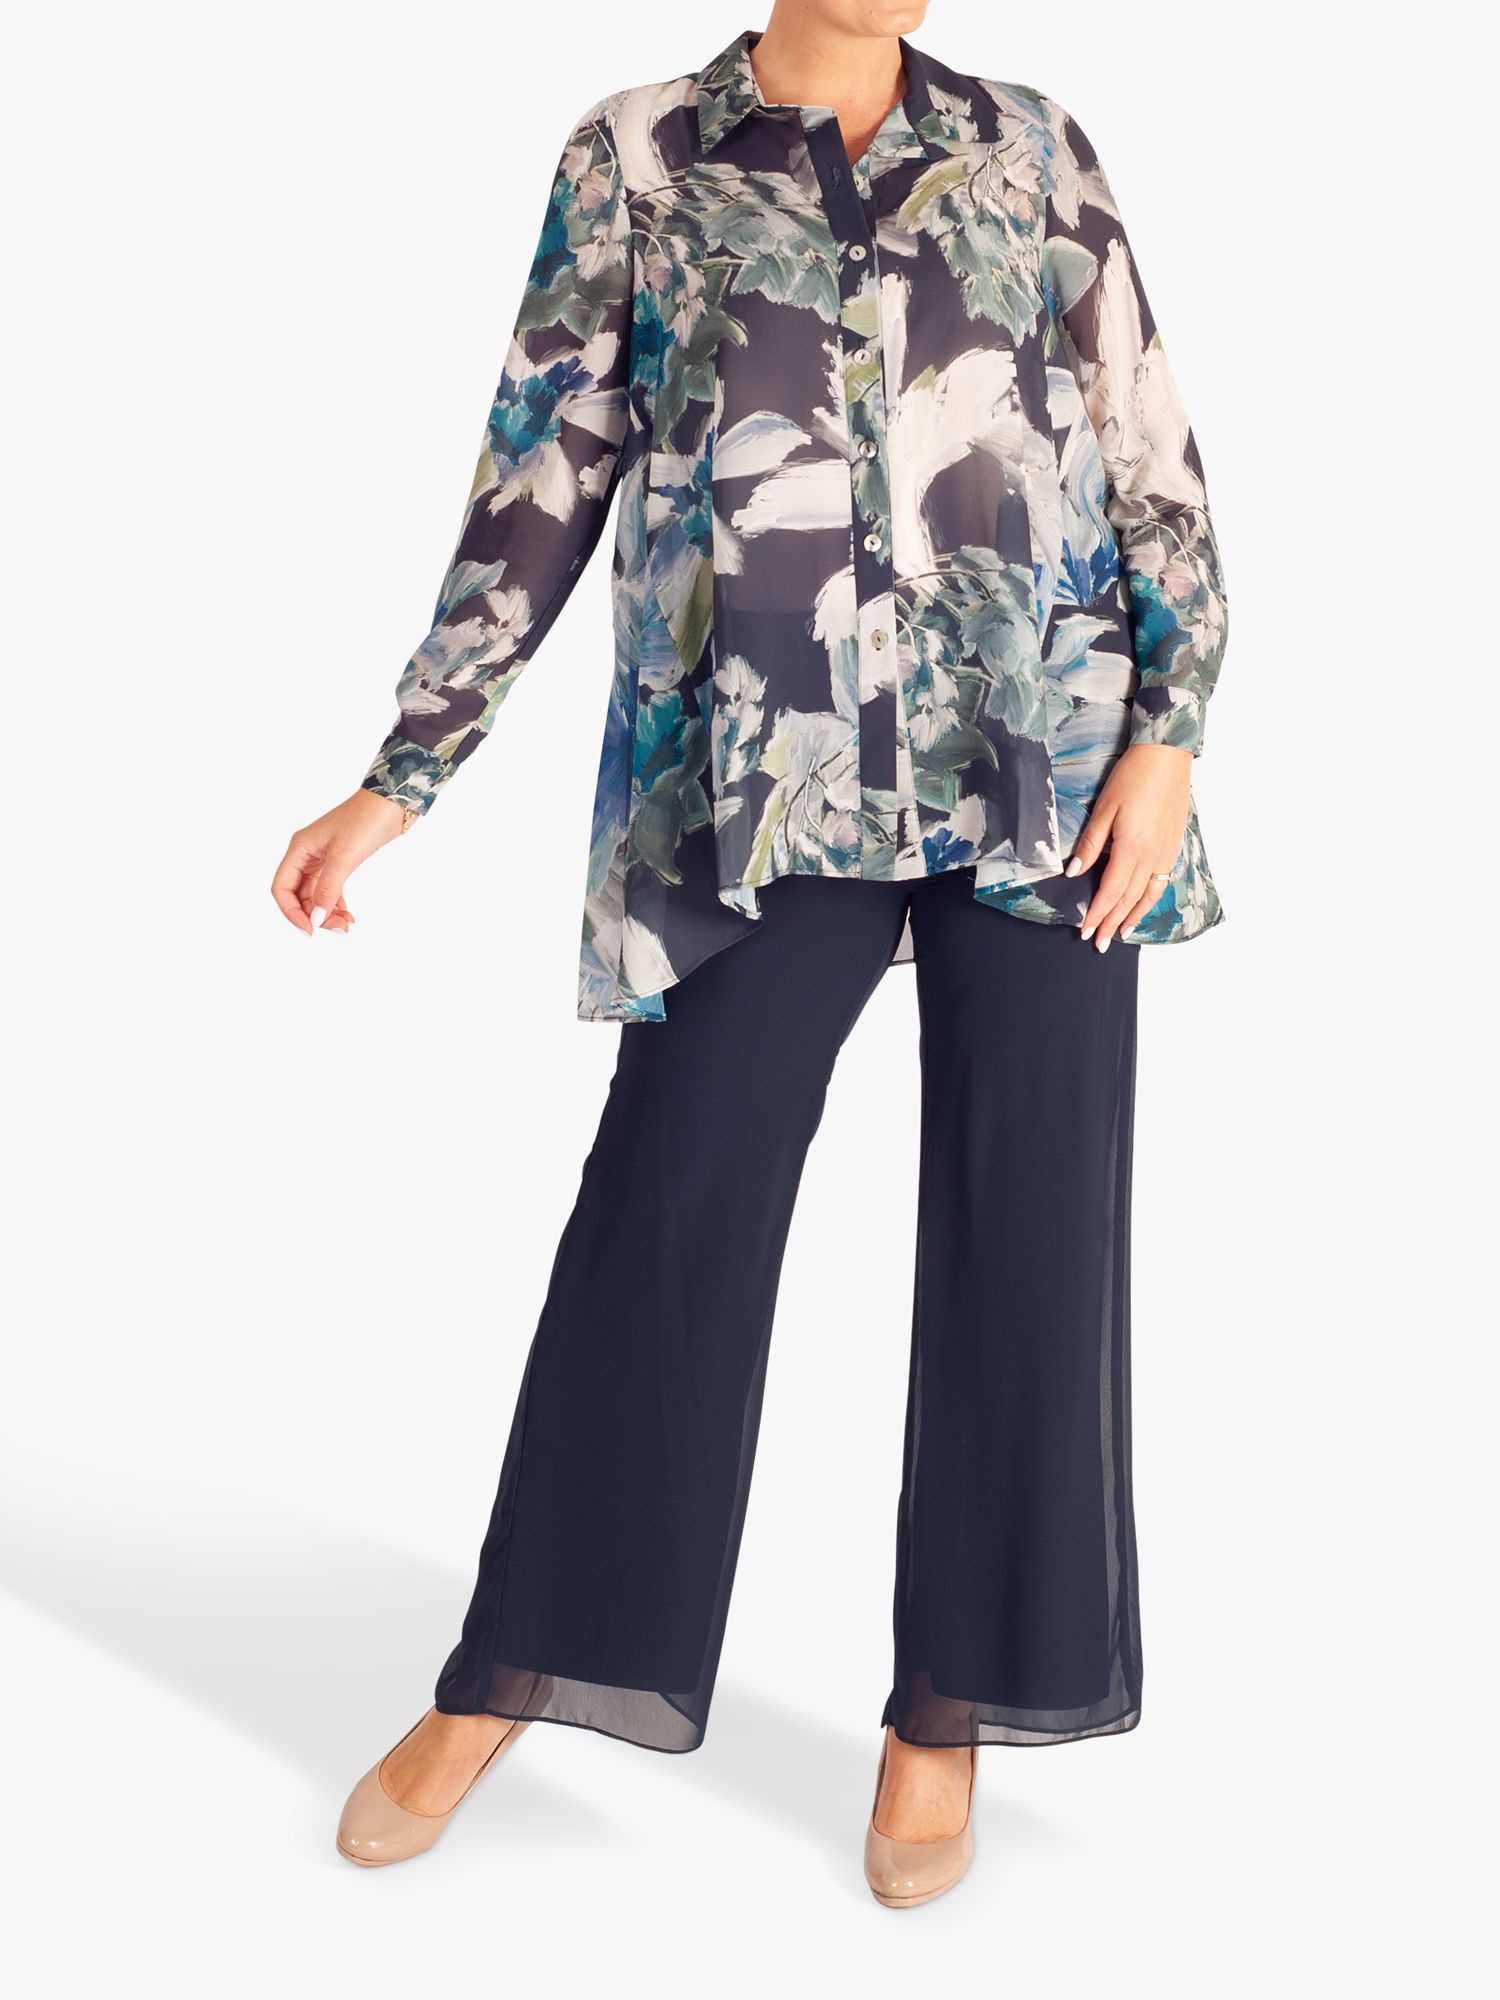 Buy chesca Paris Abstract Floral Print Chiffon Shirt, Navy/Multi Online at johnlewis.com